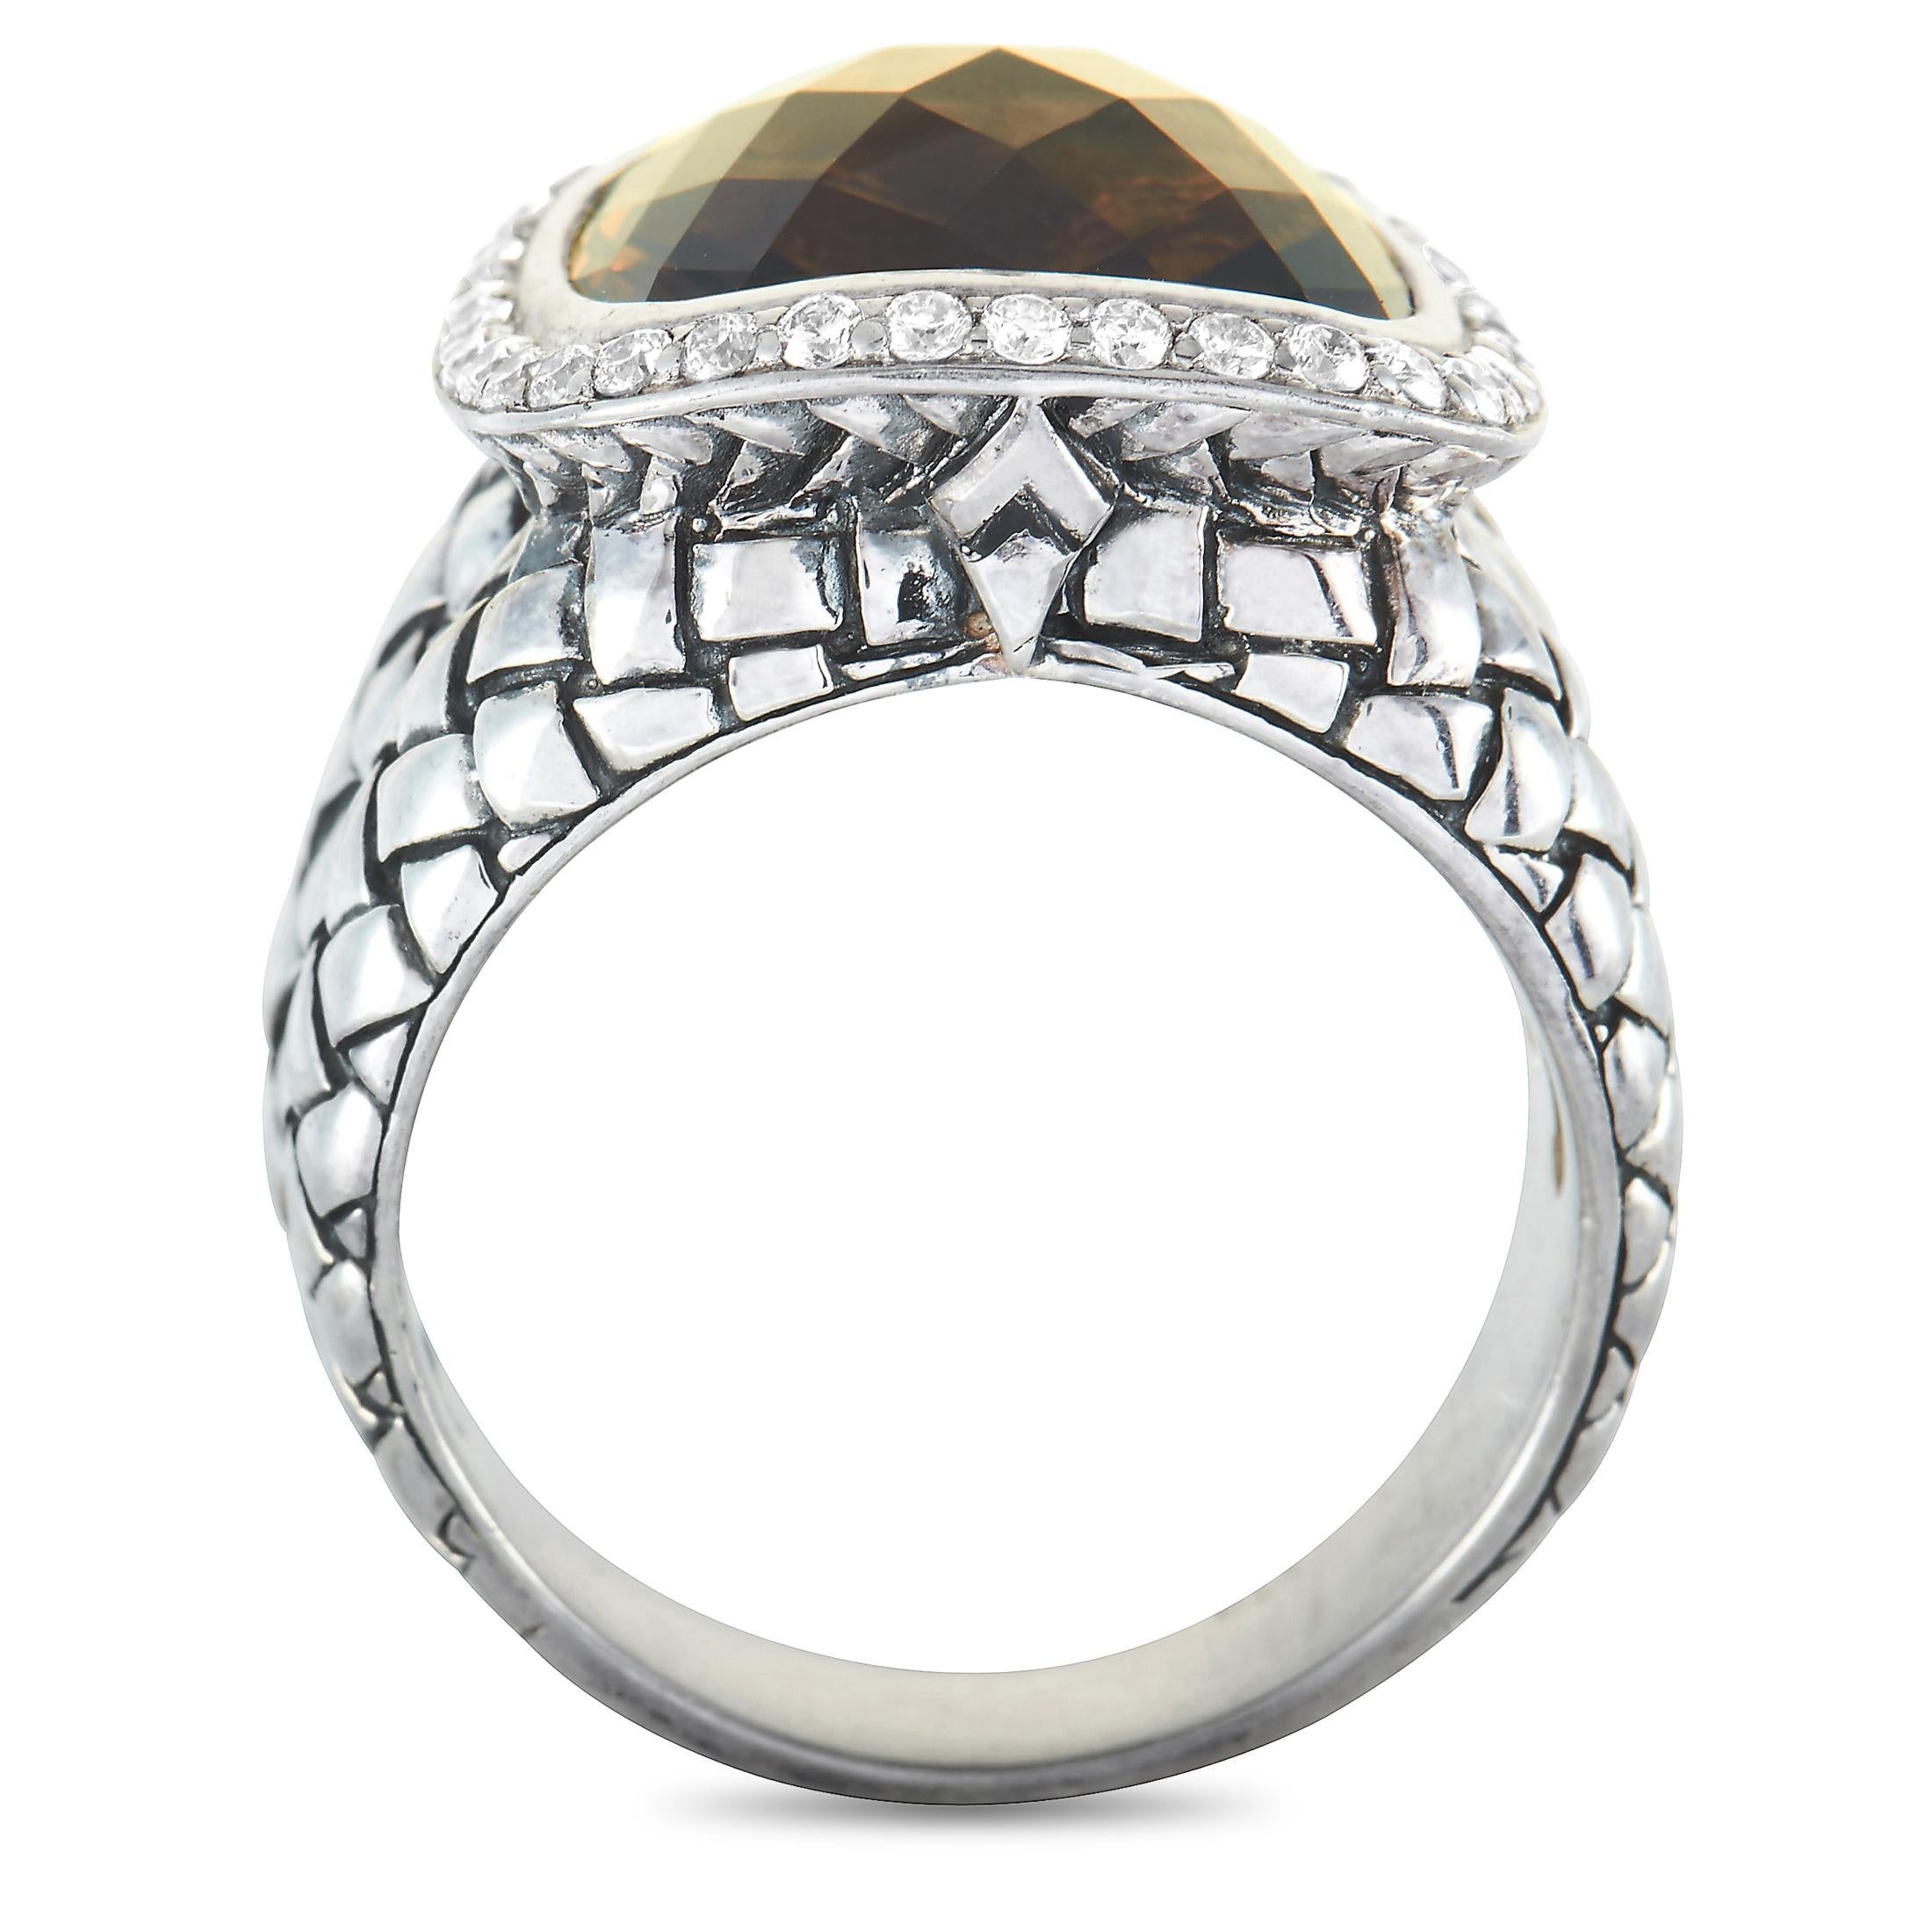 This Scott Kay ring is crafted from sterling silver and weighs 11.9 grams, boasting band thickness of 5 mm and top height of 10 mm, while top dimensions measure 16 by 16 mm. The ring is set with diamonds and a quartz stone.

Offered in brand new